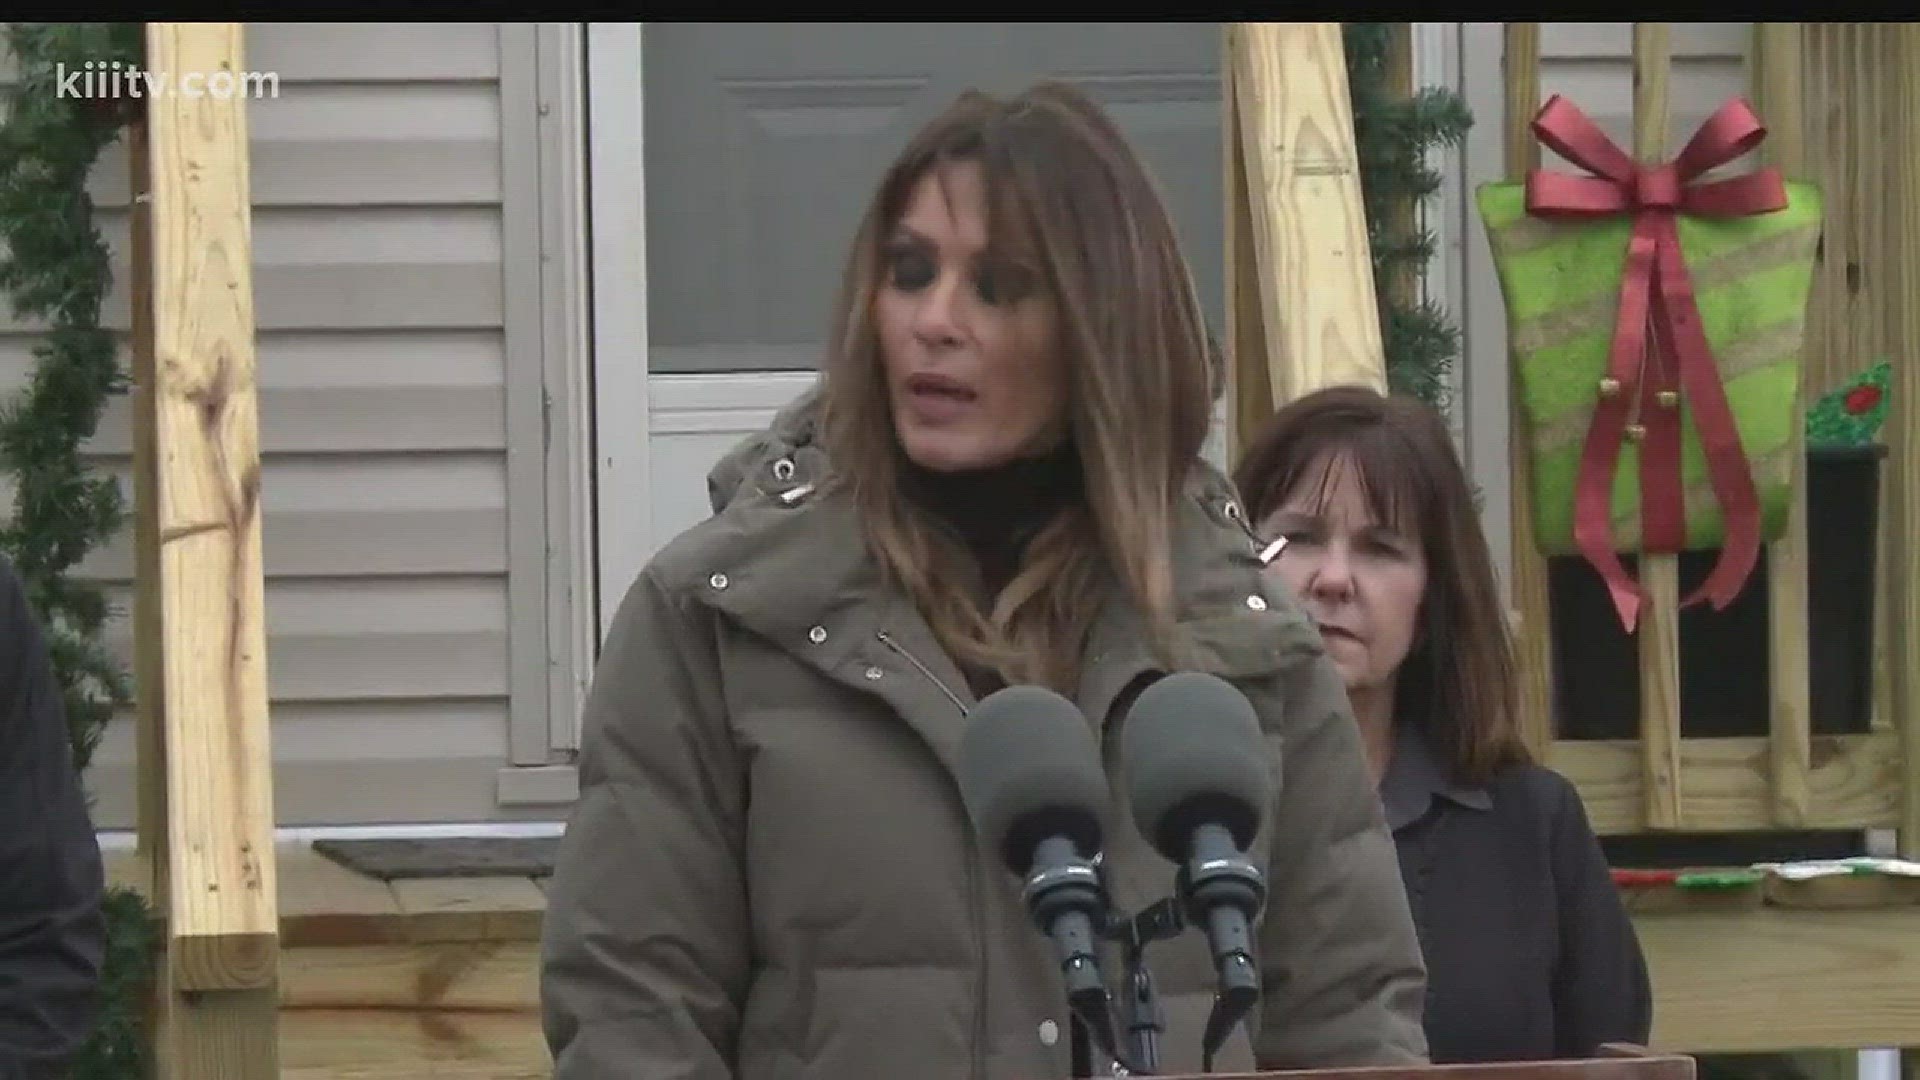 First Lady Melania Trump and Second Lady Karen Pence arrived in the Coastal Bend Wednesday to meet with families affected by Hurricane Harvey and the first responders who are part of the recovery effort.